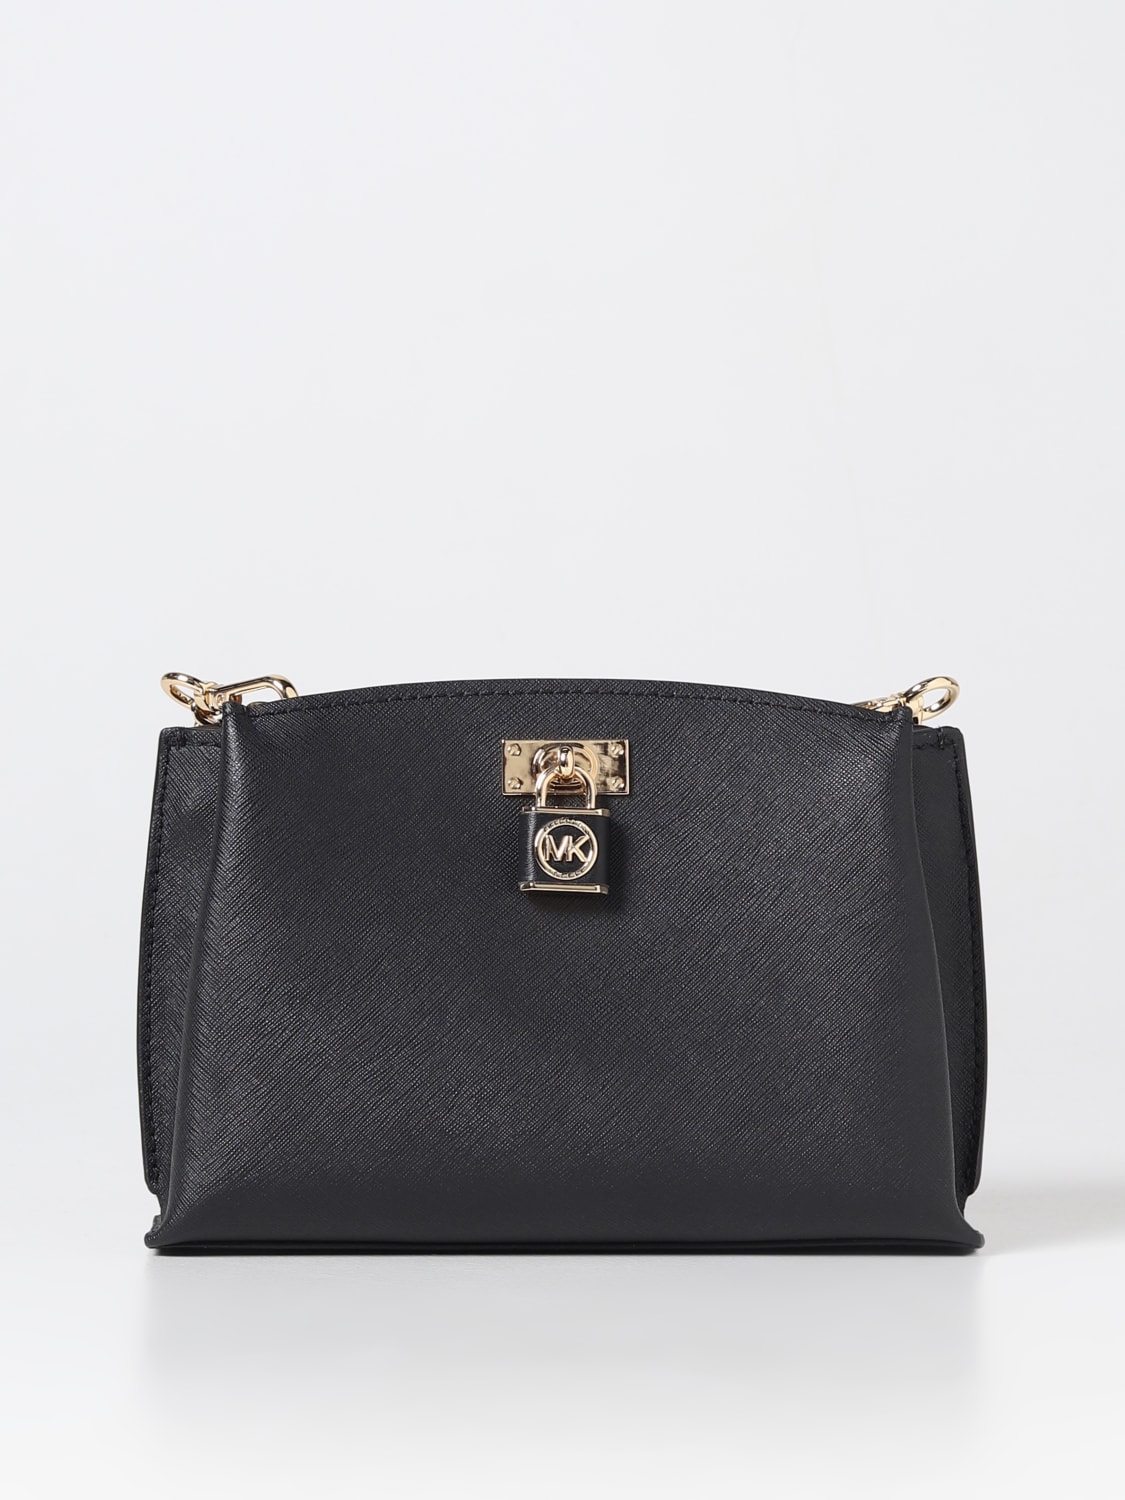 Michael Kors Outlet: Michael Ruby bag in saffiano leather